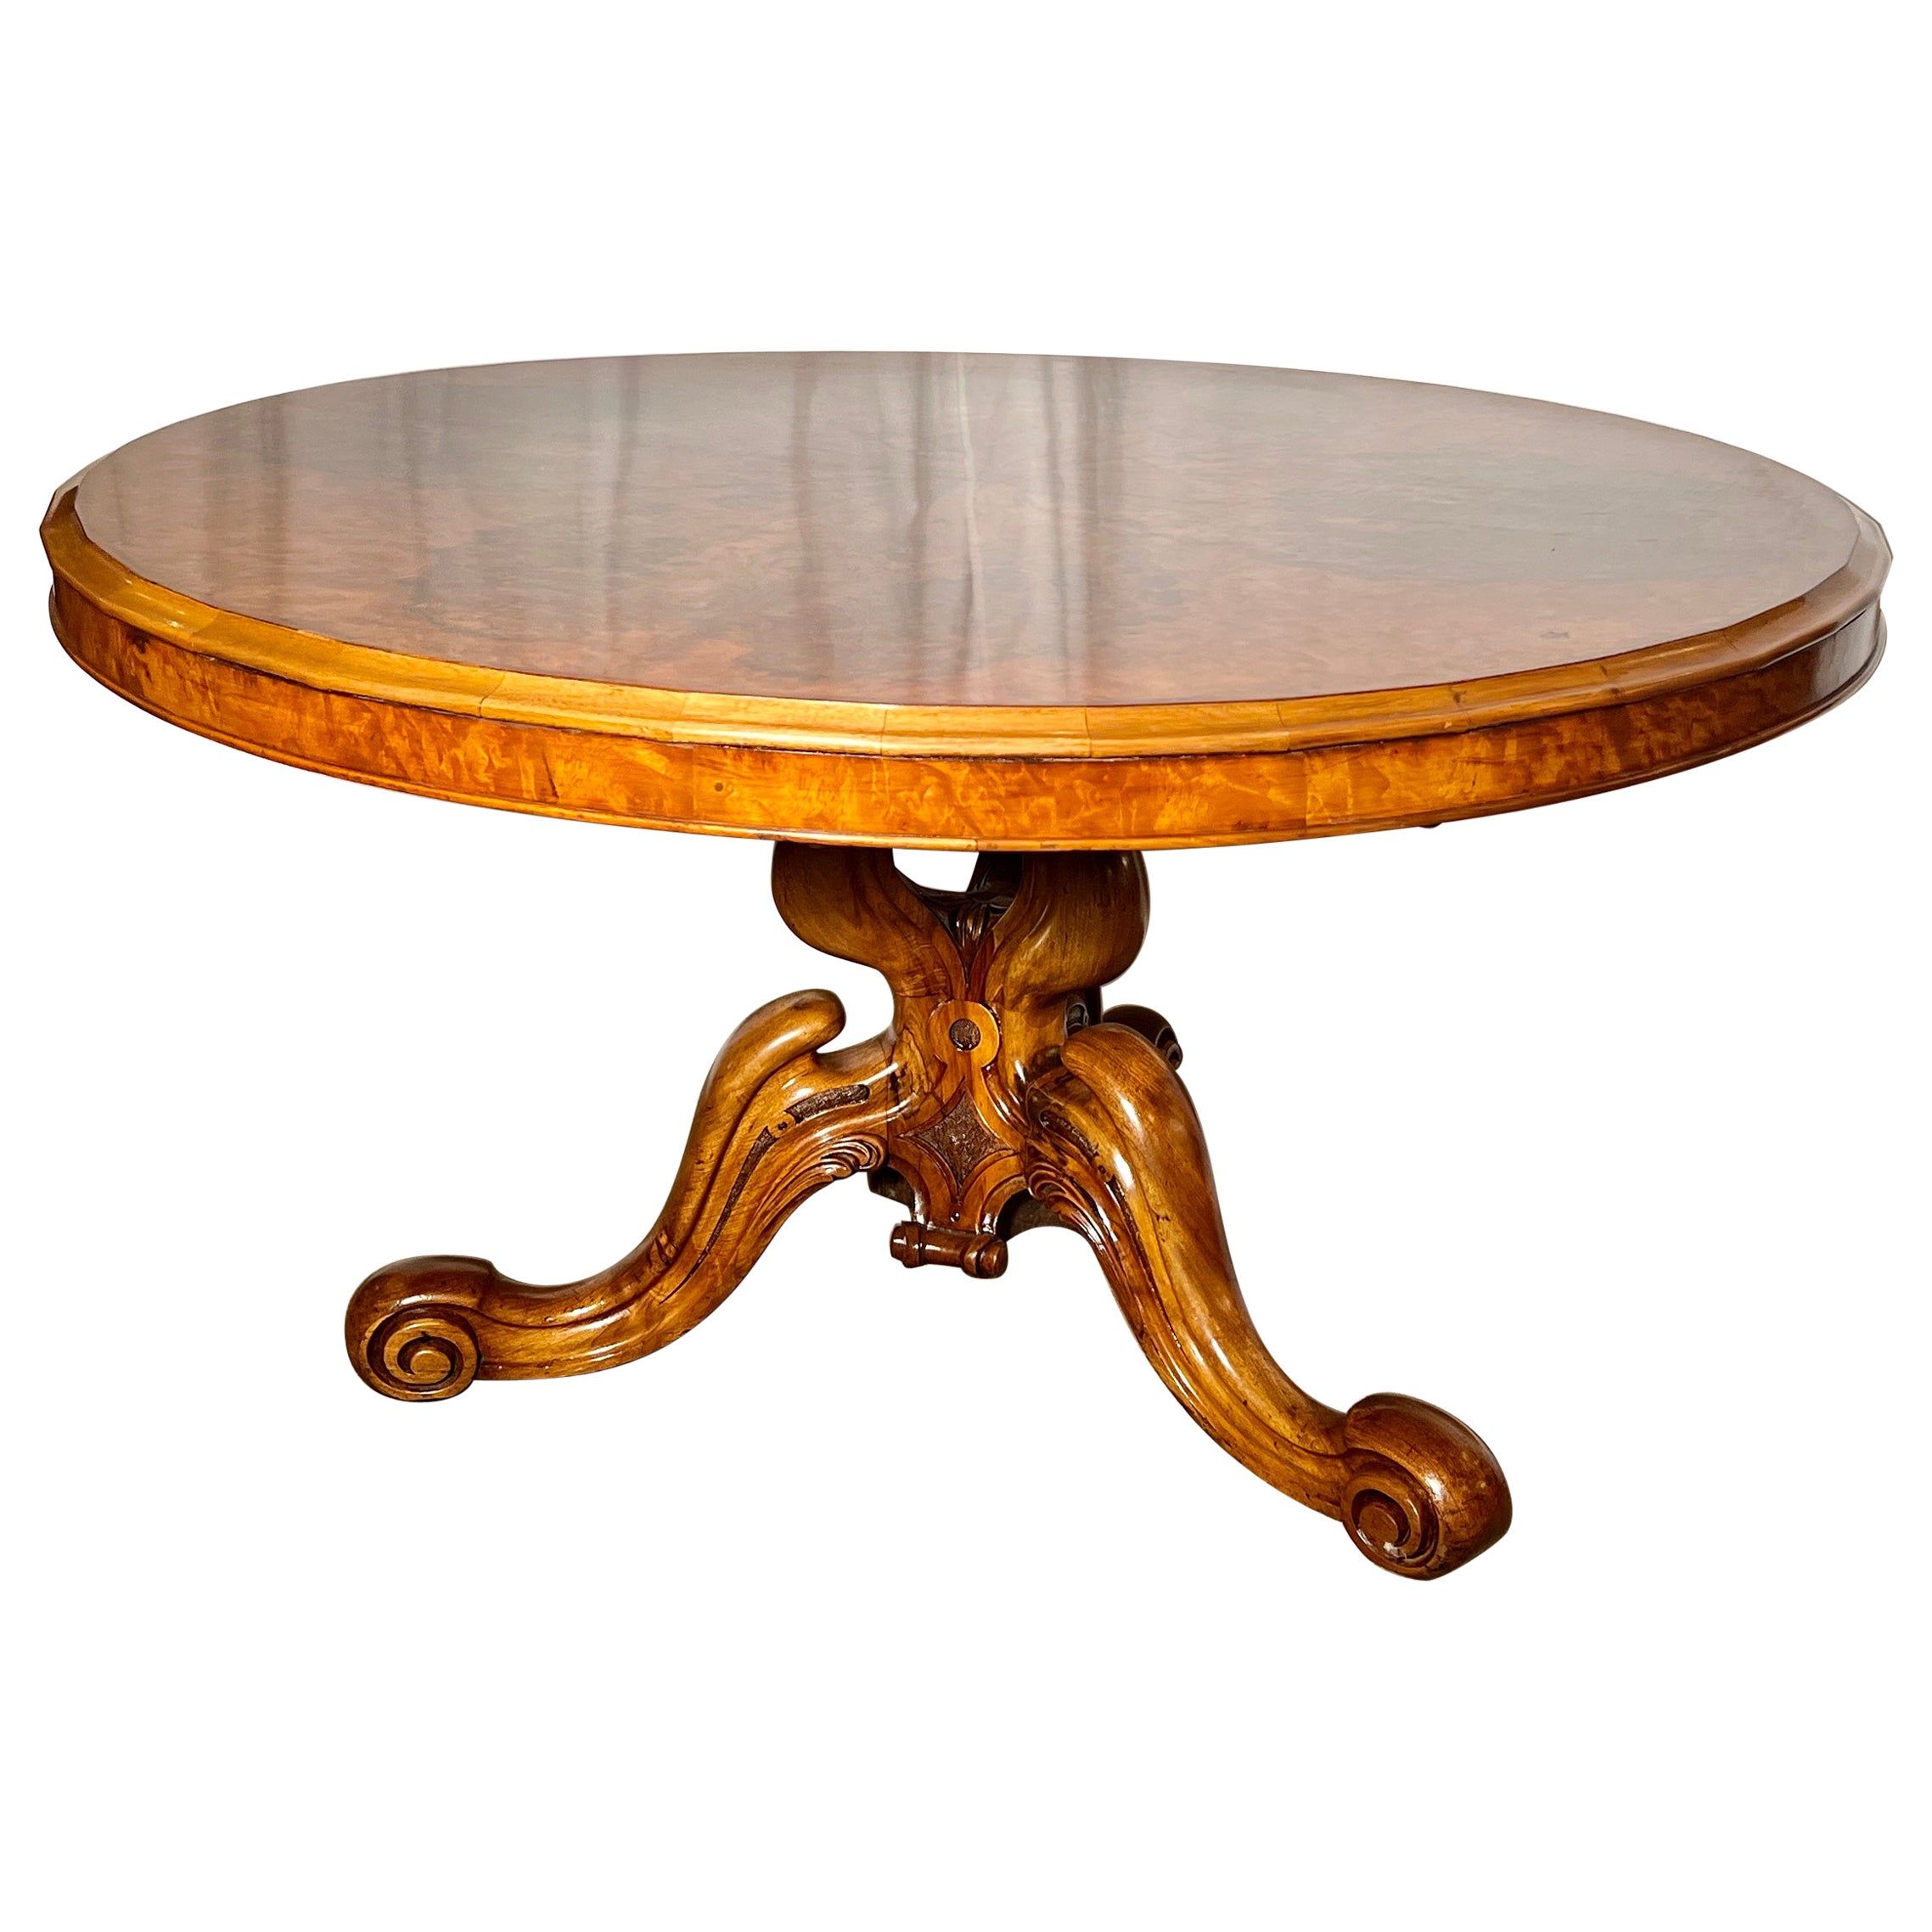 Ancienne table centrale anglaise en noyer ronce, Circa 1890.